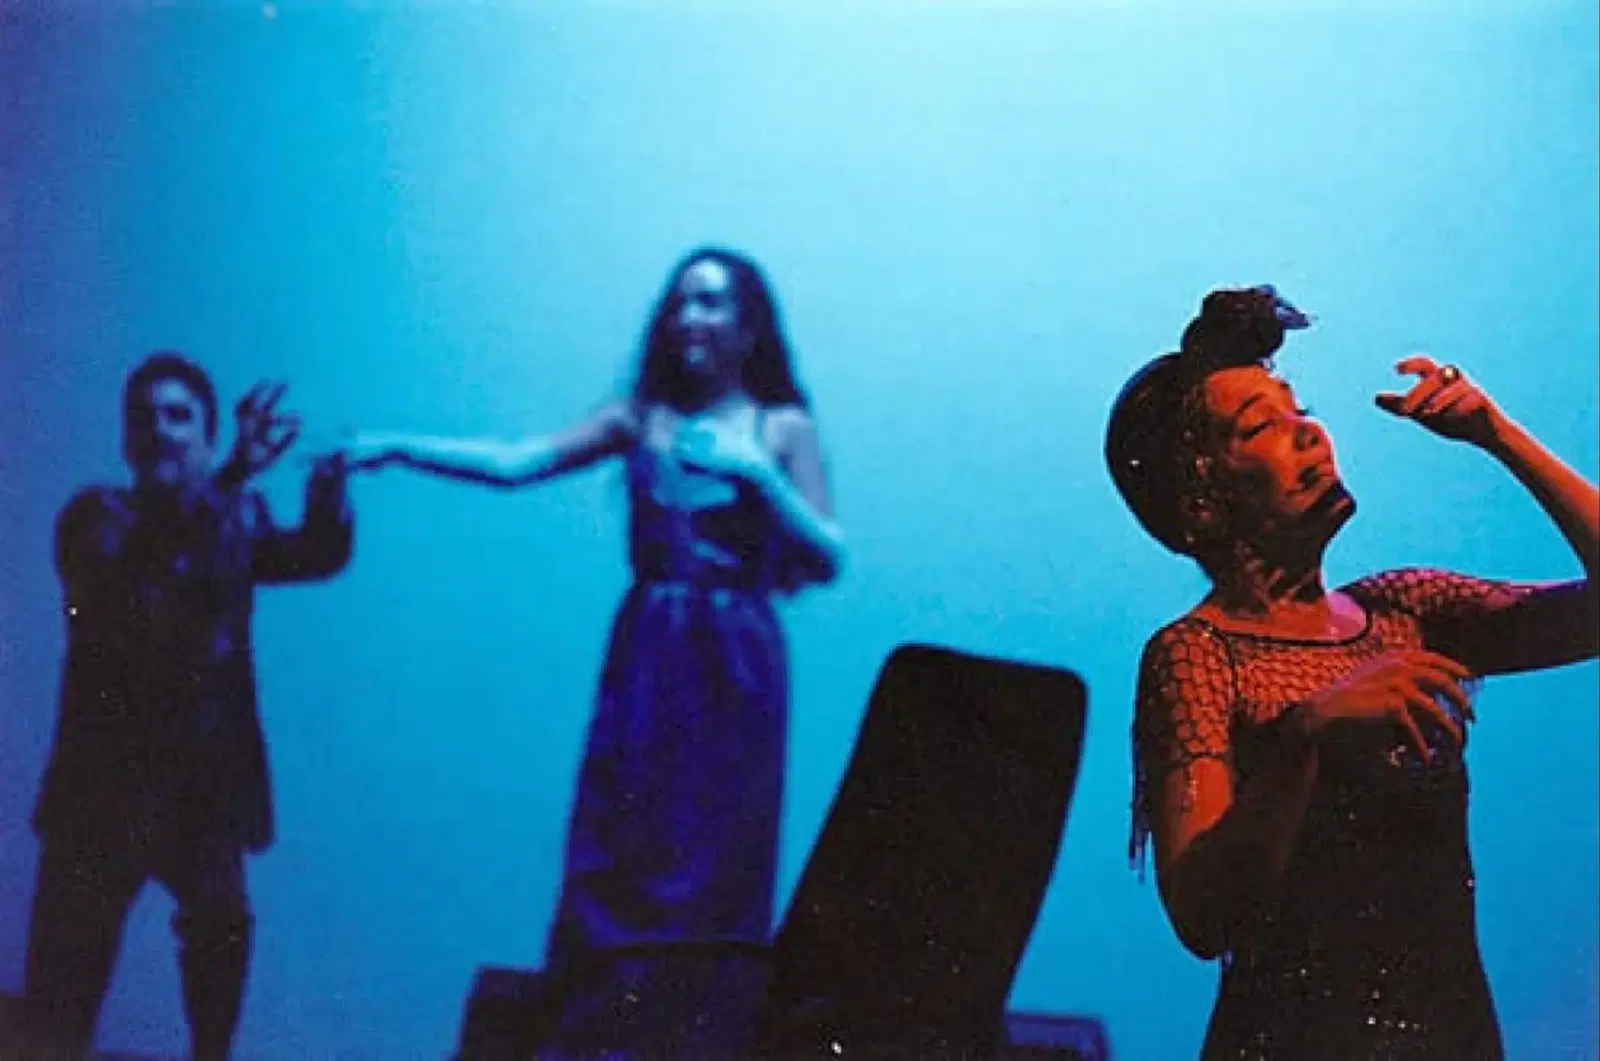 Three performers engaged in a dramatic moment on stage, bathed in moody blue lighting, with one in the foreground capturing attention through expressive gesturing.